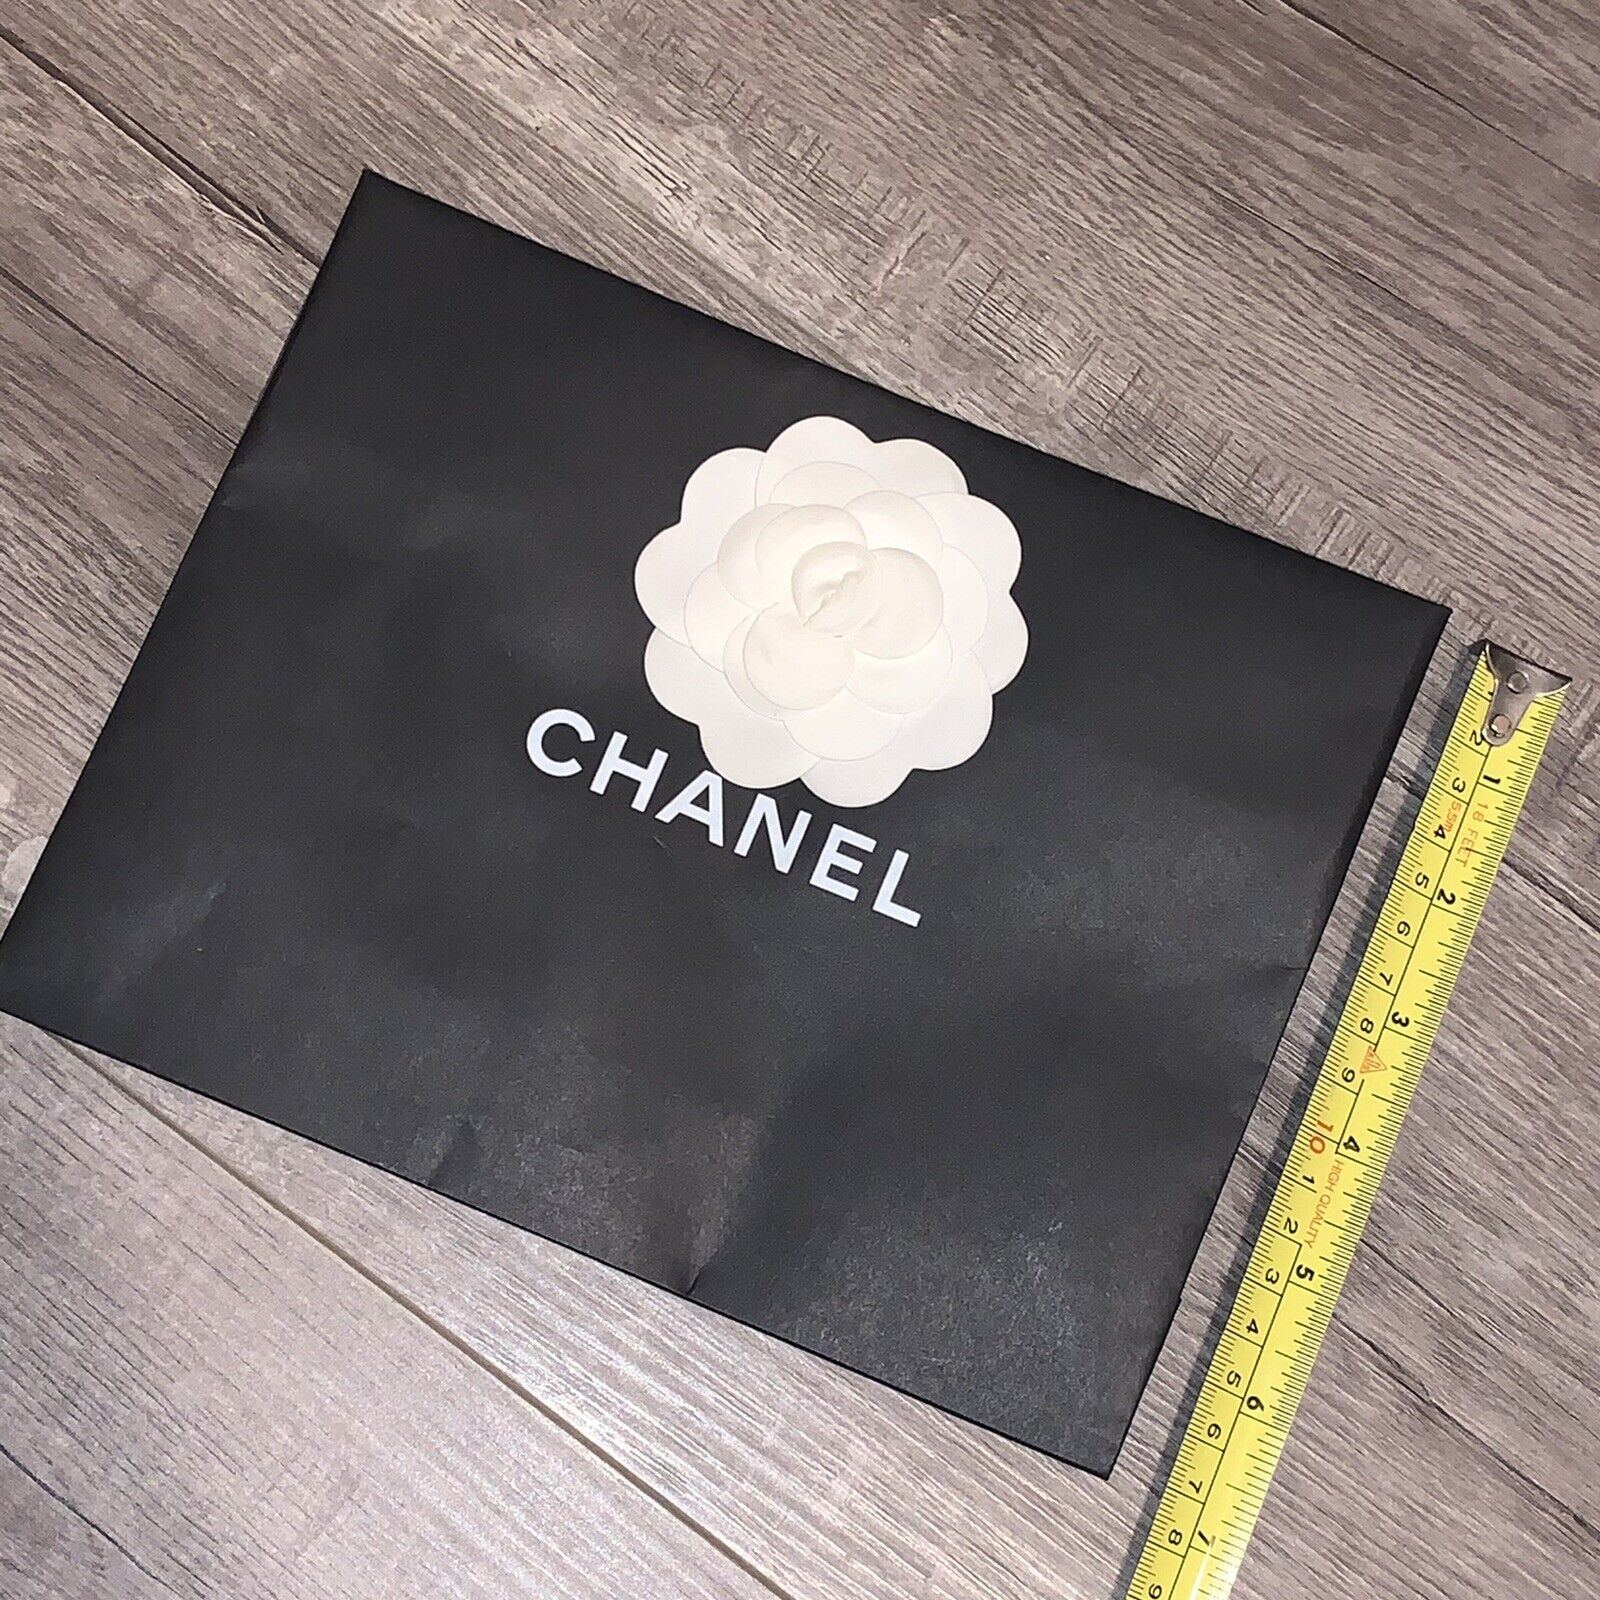 Auth. Chanel paper shopping bag With Flower 9x7x2.5” Size S